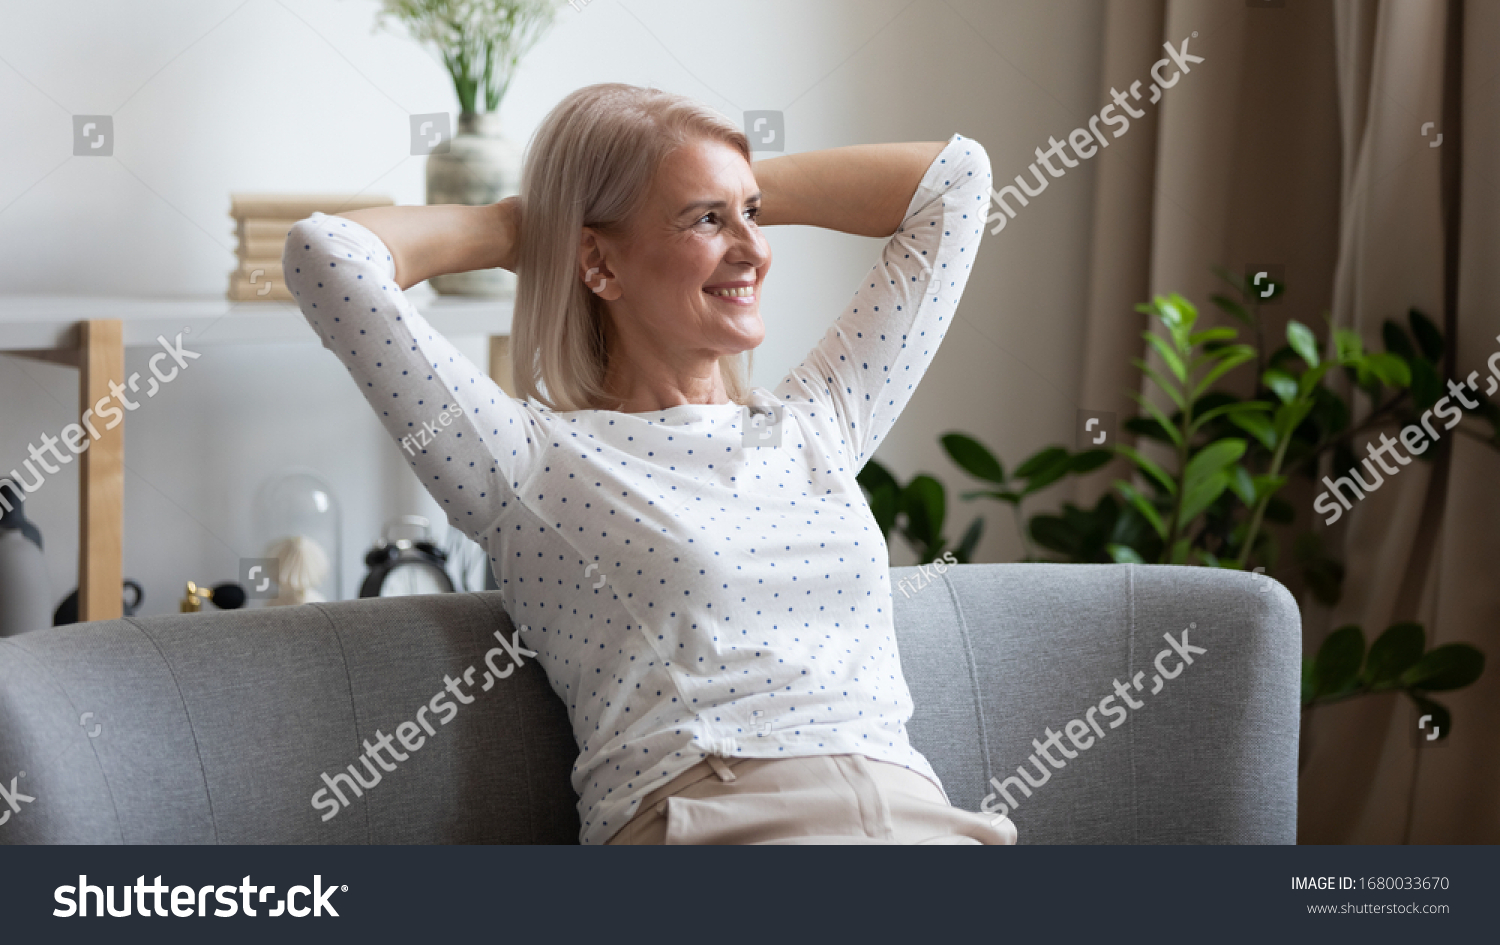 Pleasant smiling middle aged woman relaxing on cozy coach in modern living room, looking away. Happy older lady dreaming, visualizing future, resting, enjoying weekend free leisure time alone at home. #1680033670